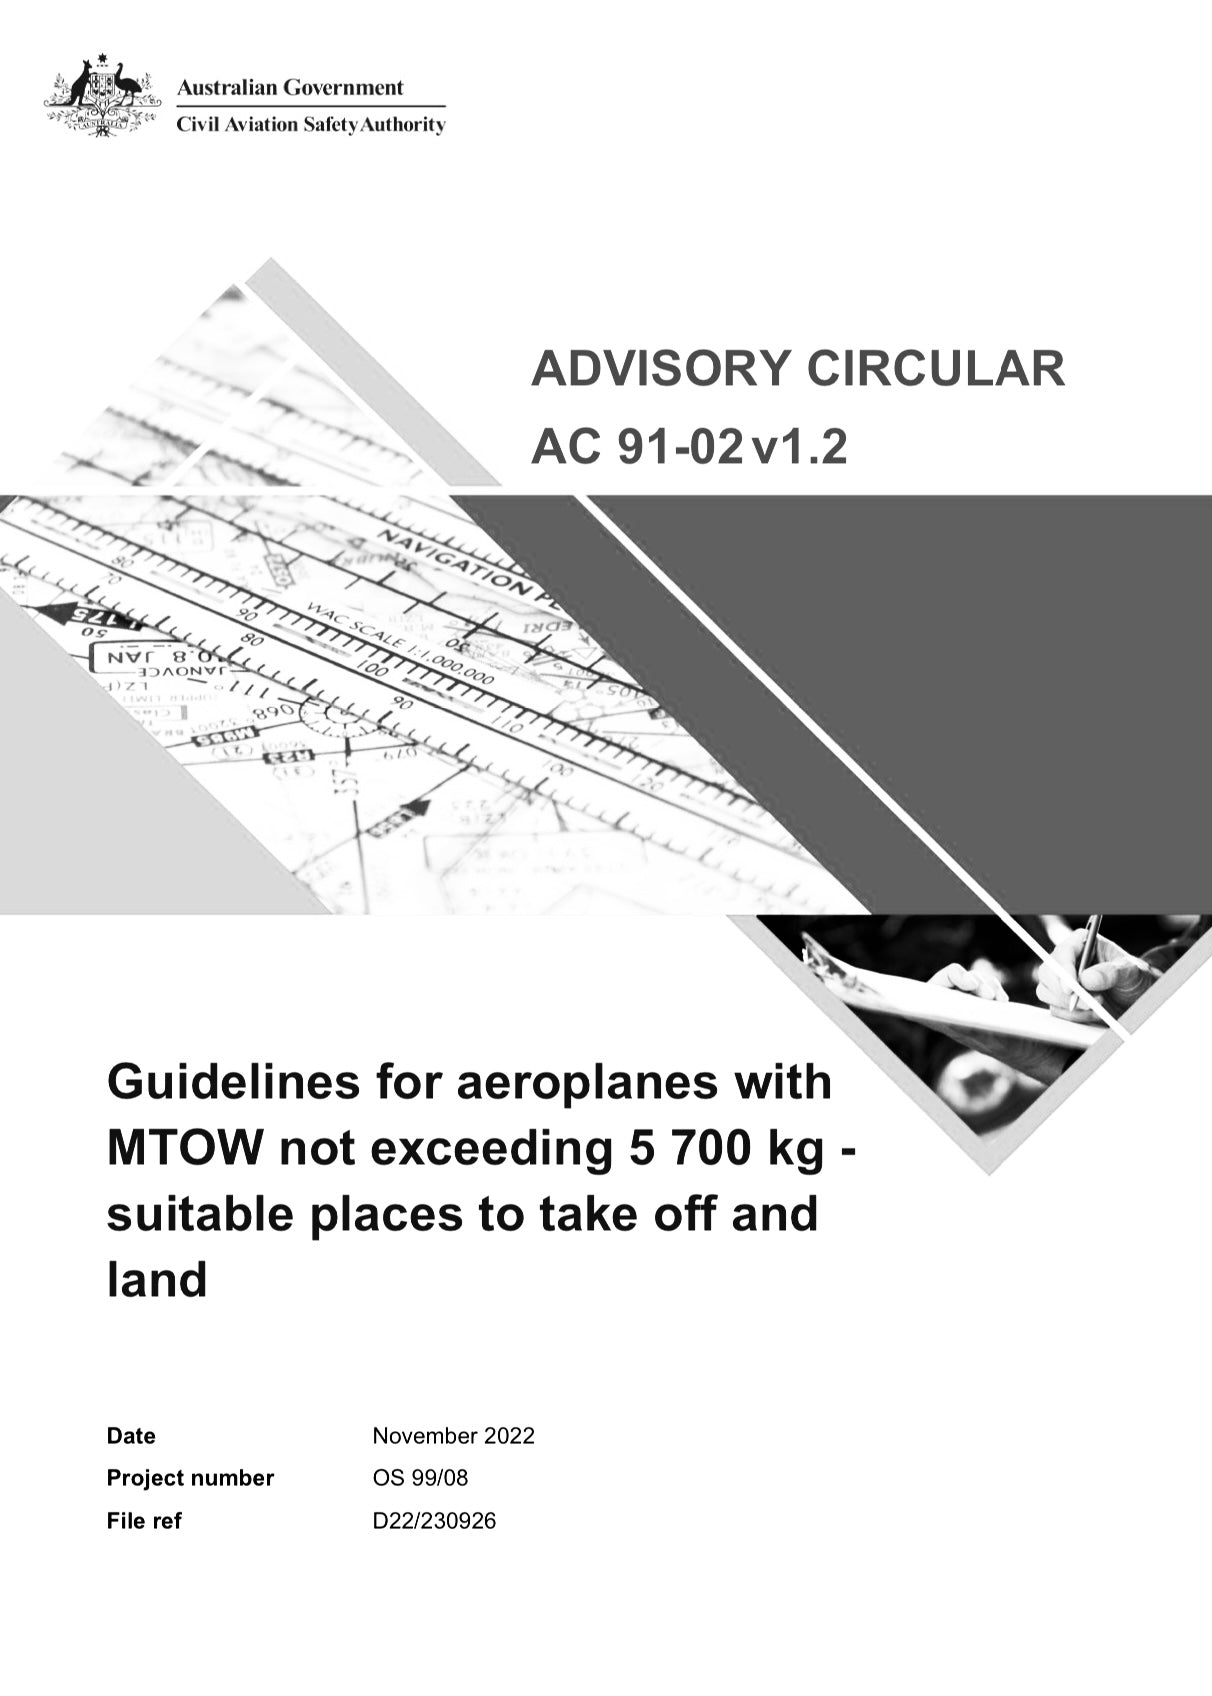 CASA Advisory Circular 91-02 - Guidelines for Aeroplanes not Exceeding 5700kg MTOW - Suitable Places to Take Off & Land